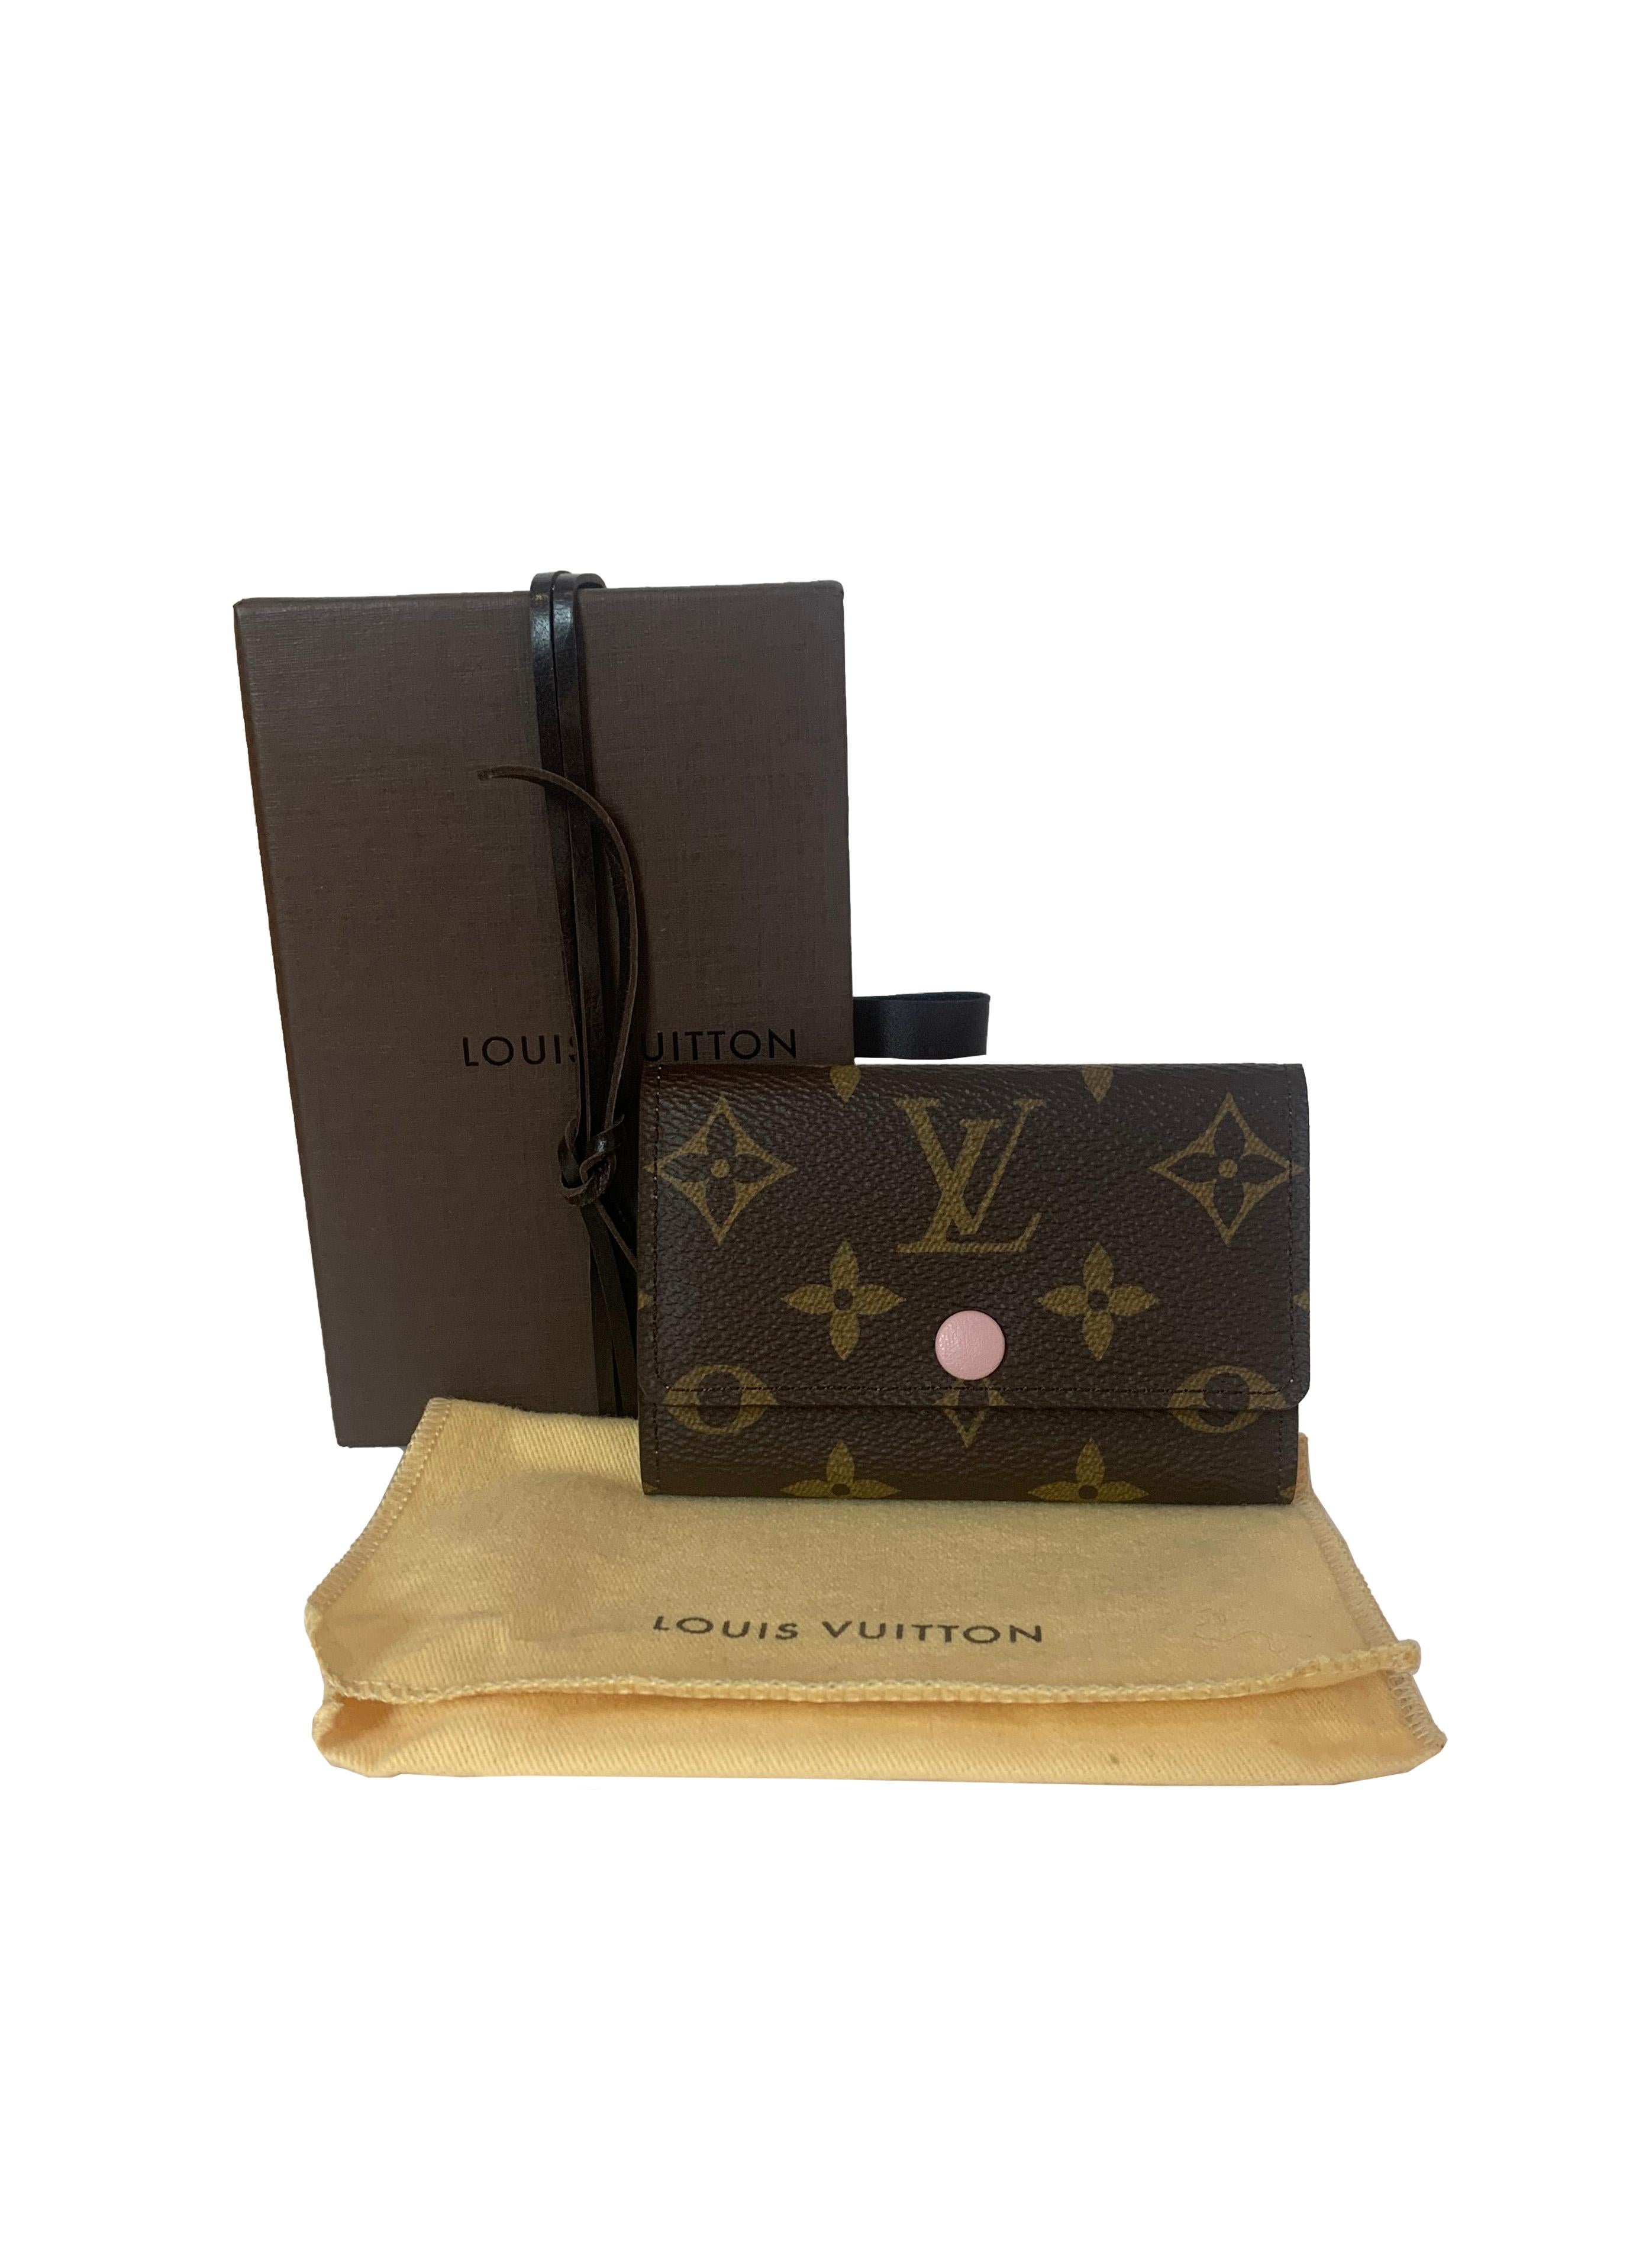 Louis Vuitton Rose Ballerine Pink & Monogram Multicles 6 Key Holder. M60701

Made In: France
Year of Production: 2015
Color:Brown and pink
Hardware: Goldtone
Materials: Coated canvas with leather snap button
Lining:Pink cross-grain leather